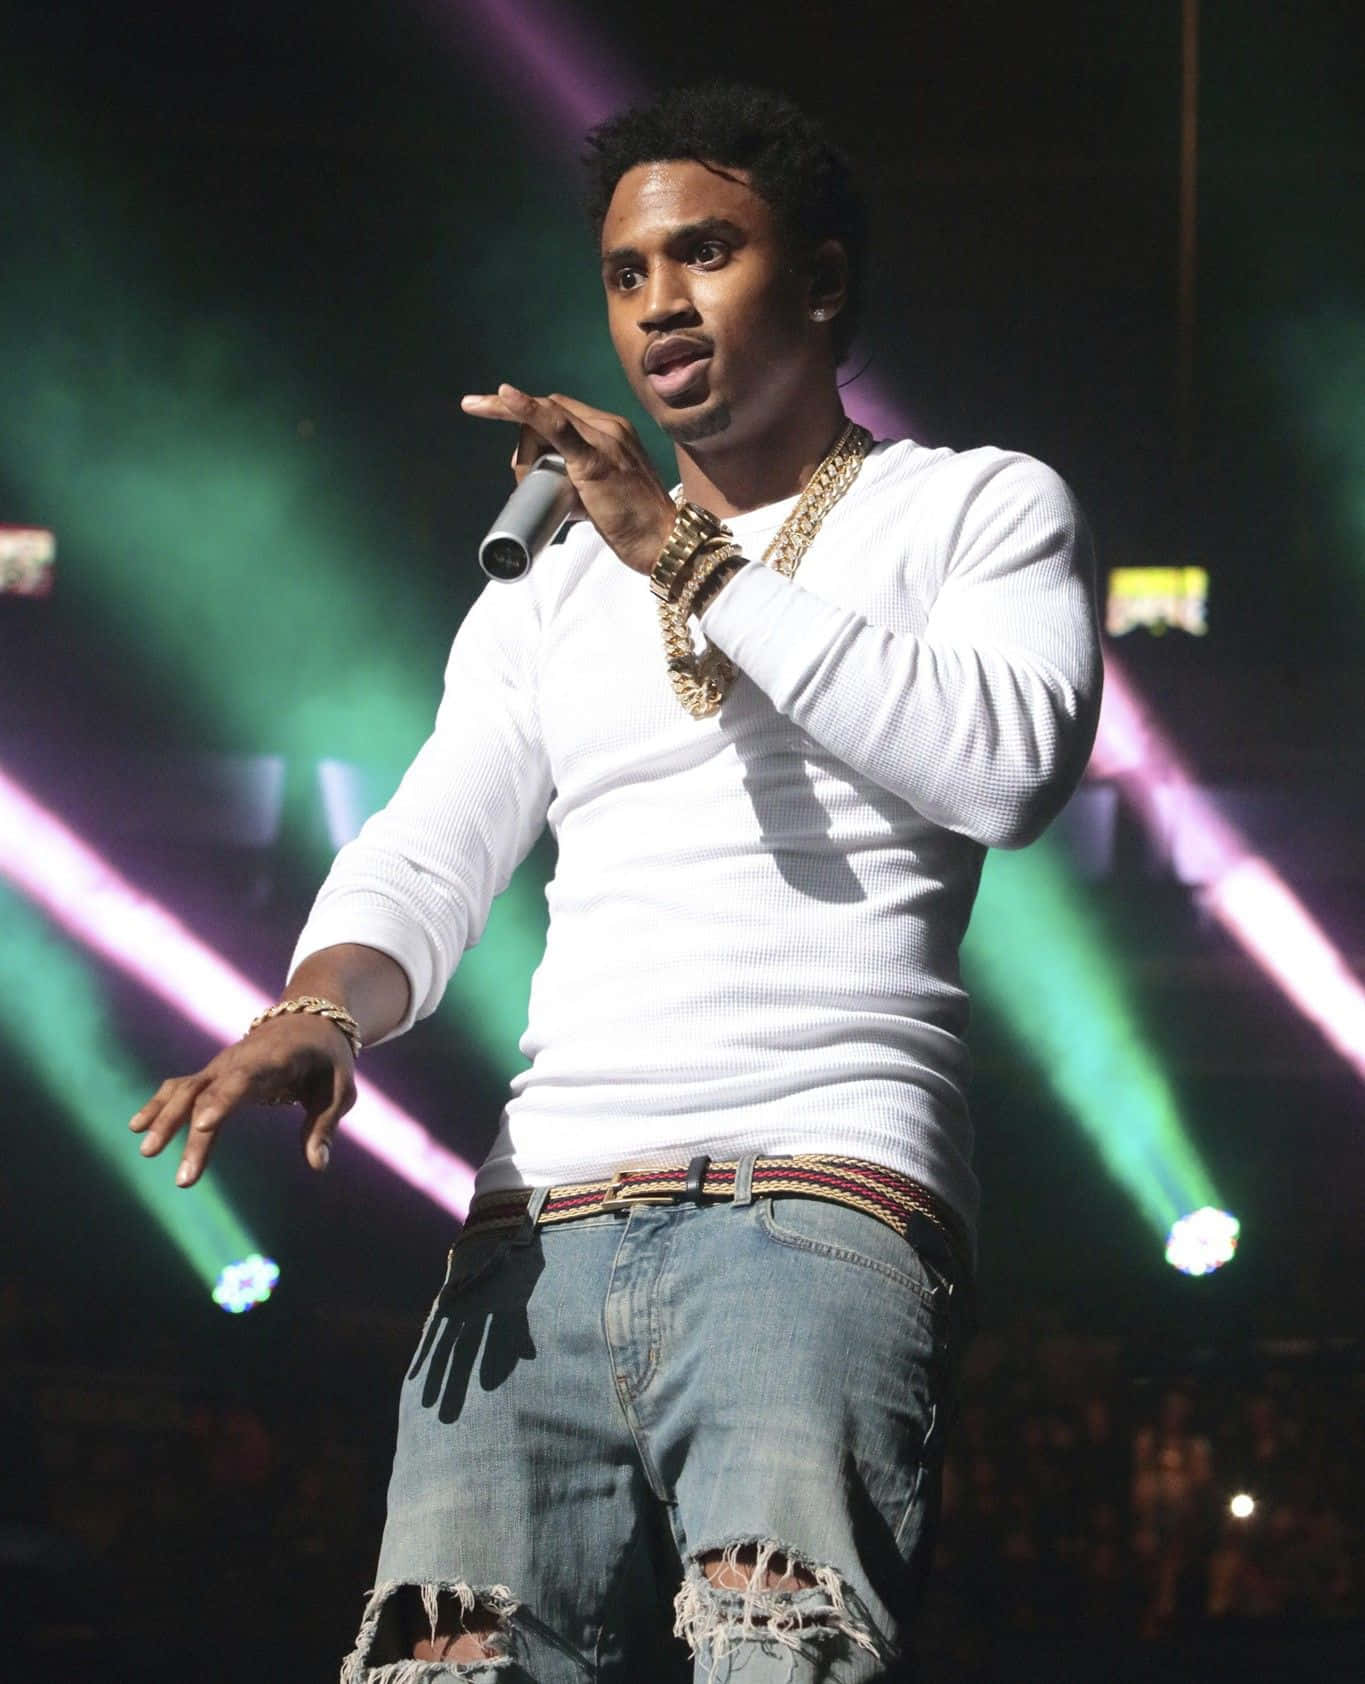 Trey Songz delivering an electrifying performance Wallpaper